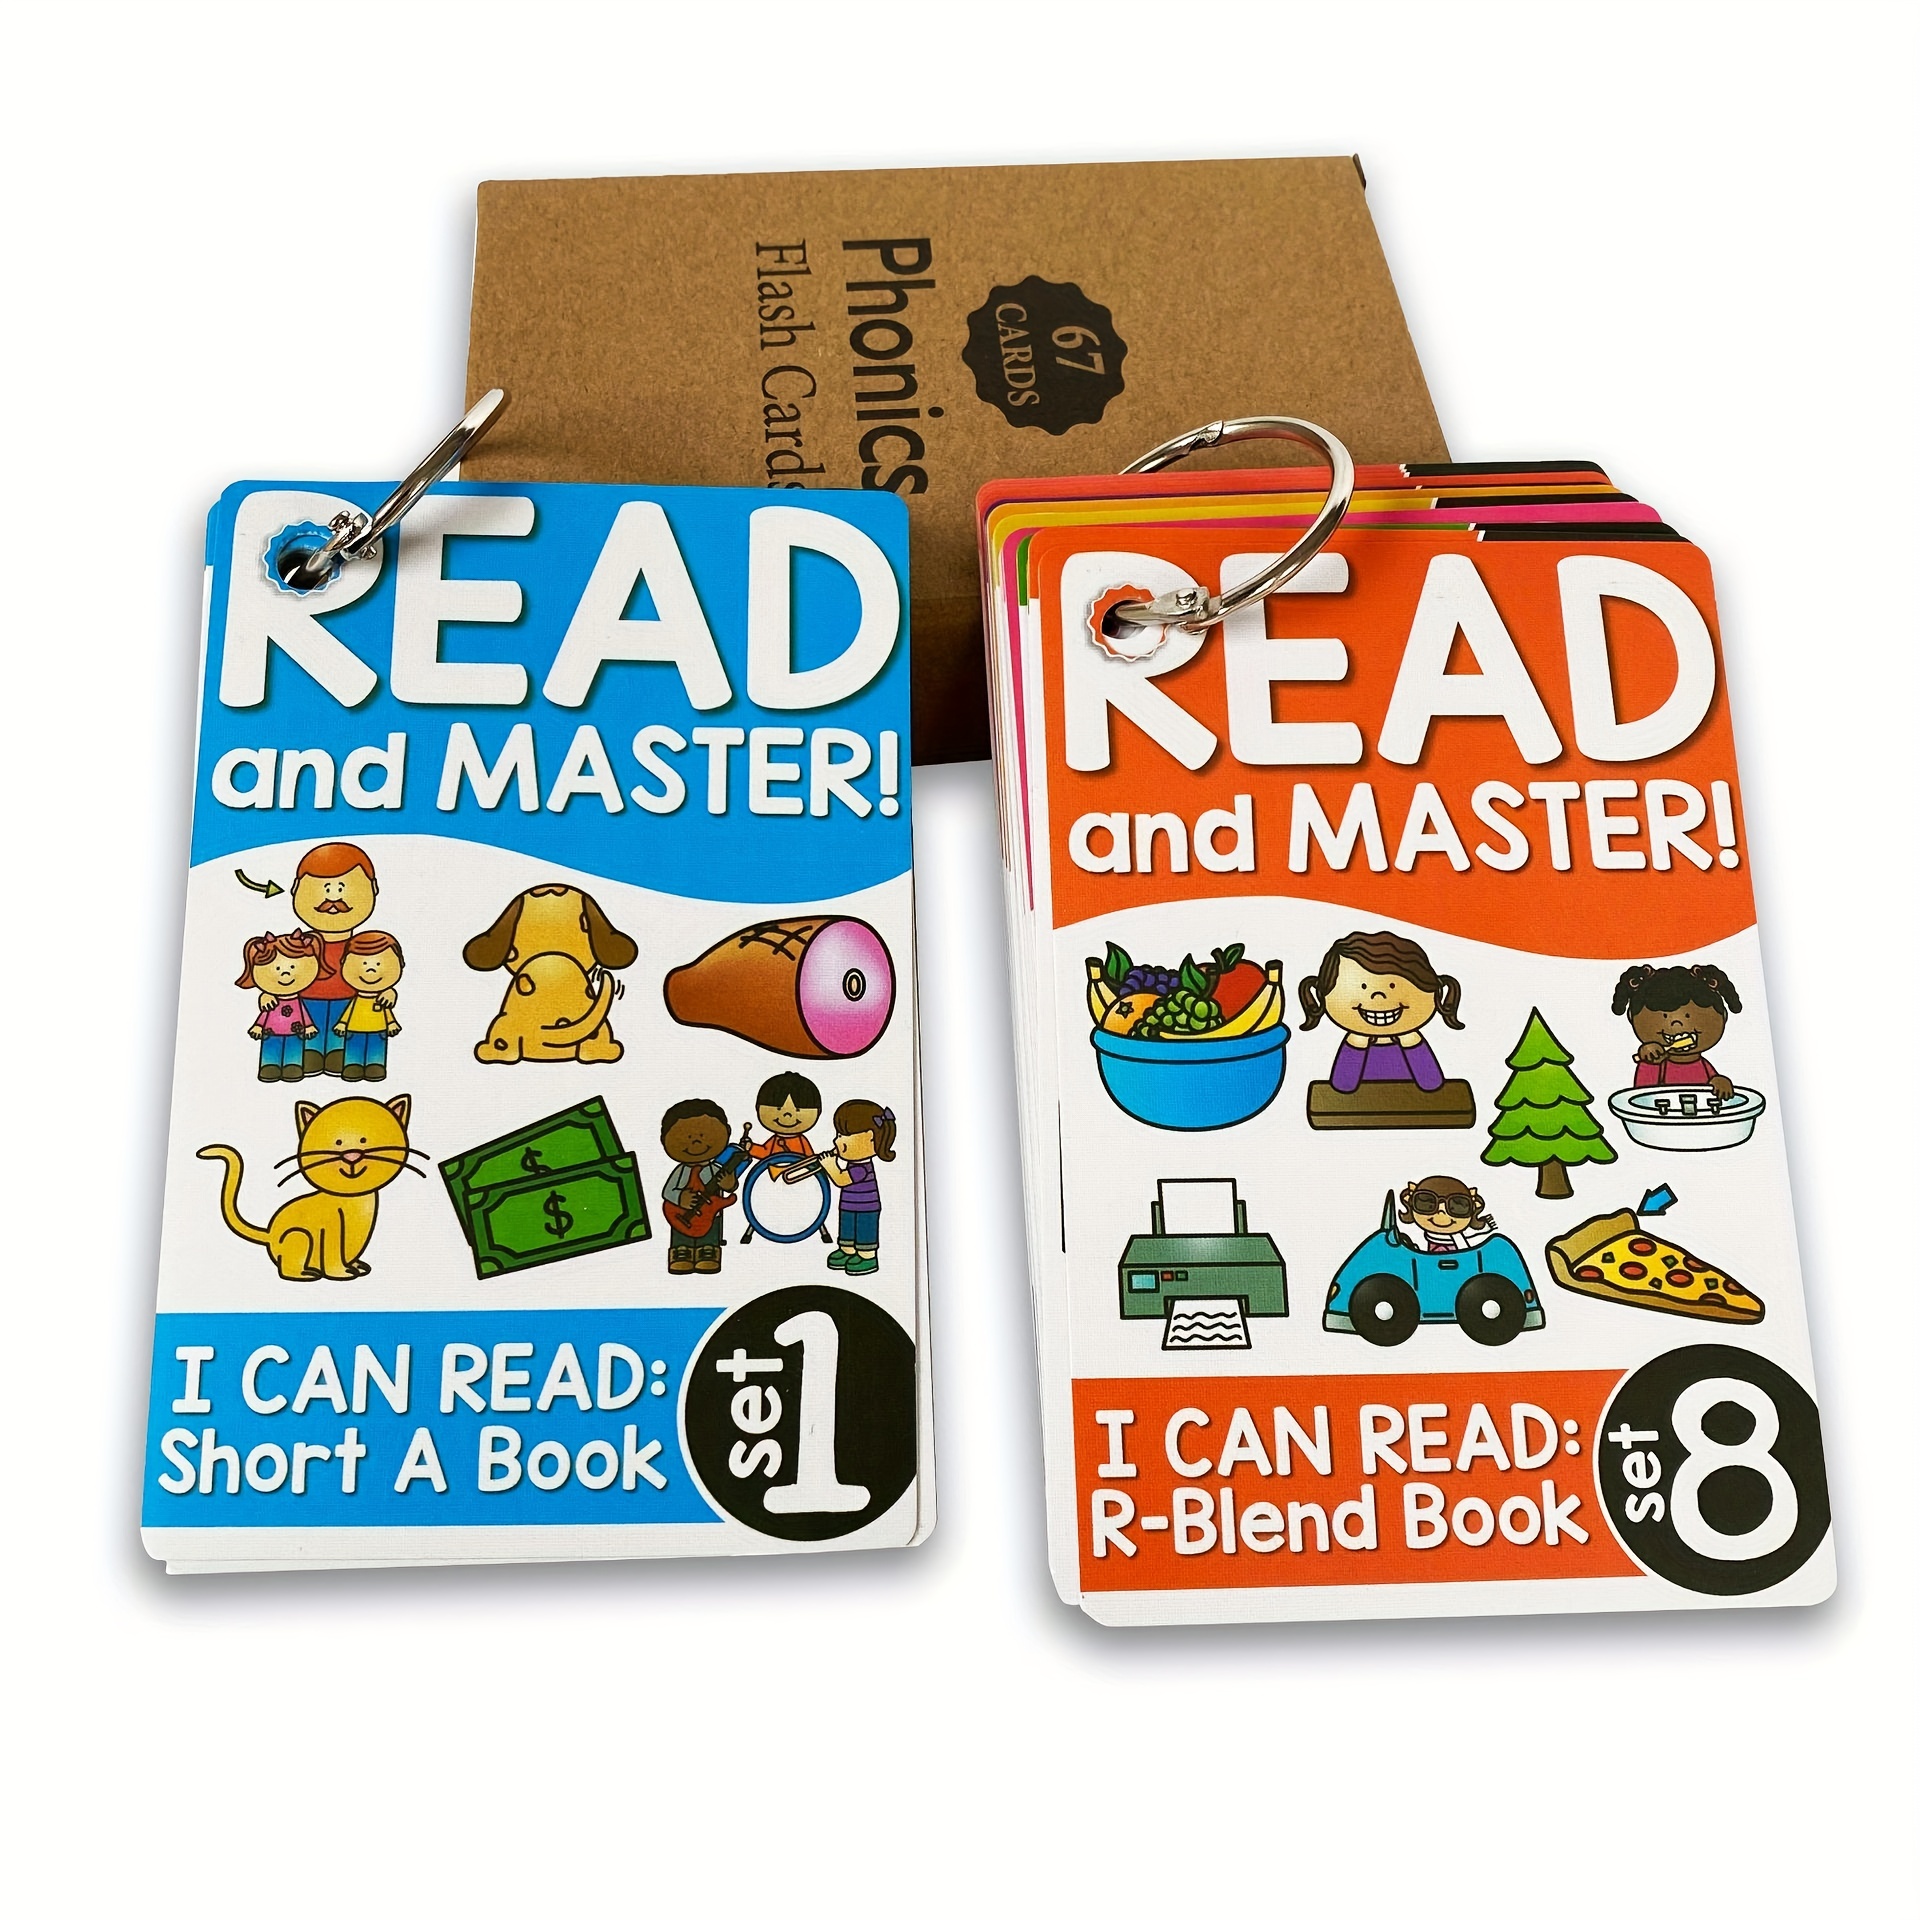 

Educational Spelling Cards For Kids - 67 Draw Recognition Cards For Early Language Development